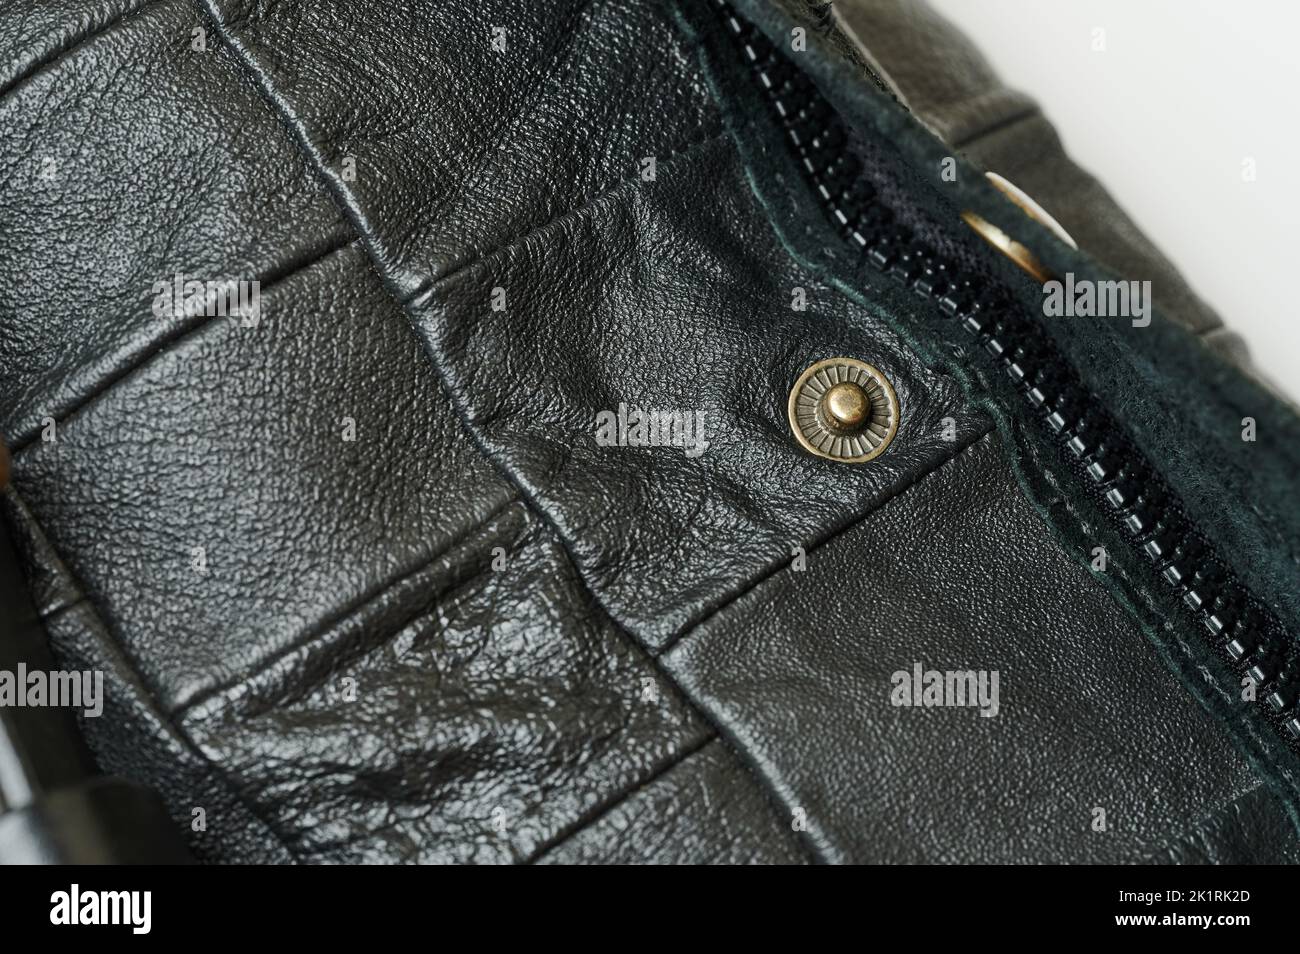 Metal knob and zipper on leather bag macro close up view Stock Photo